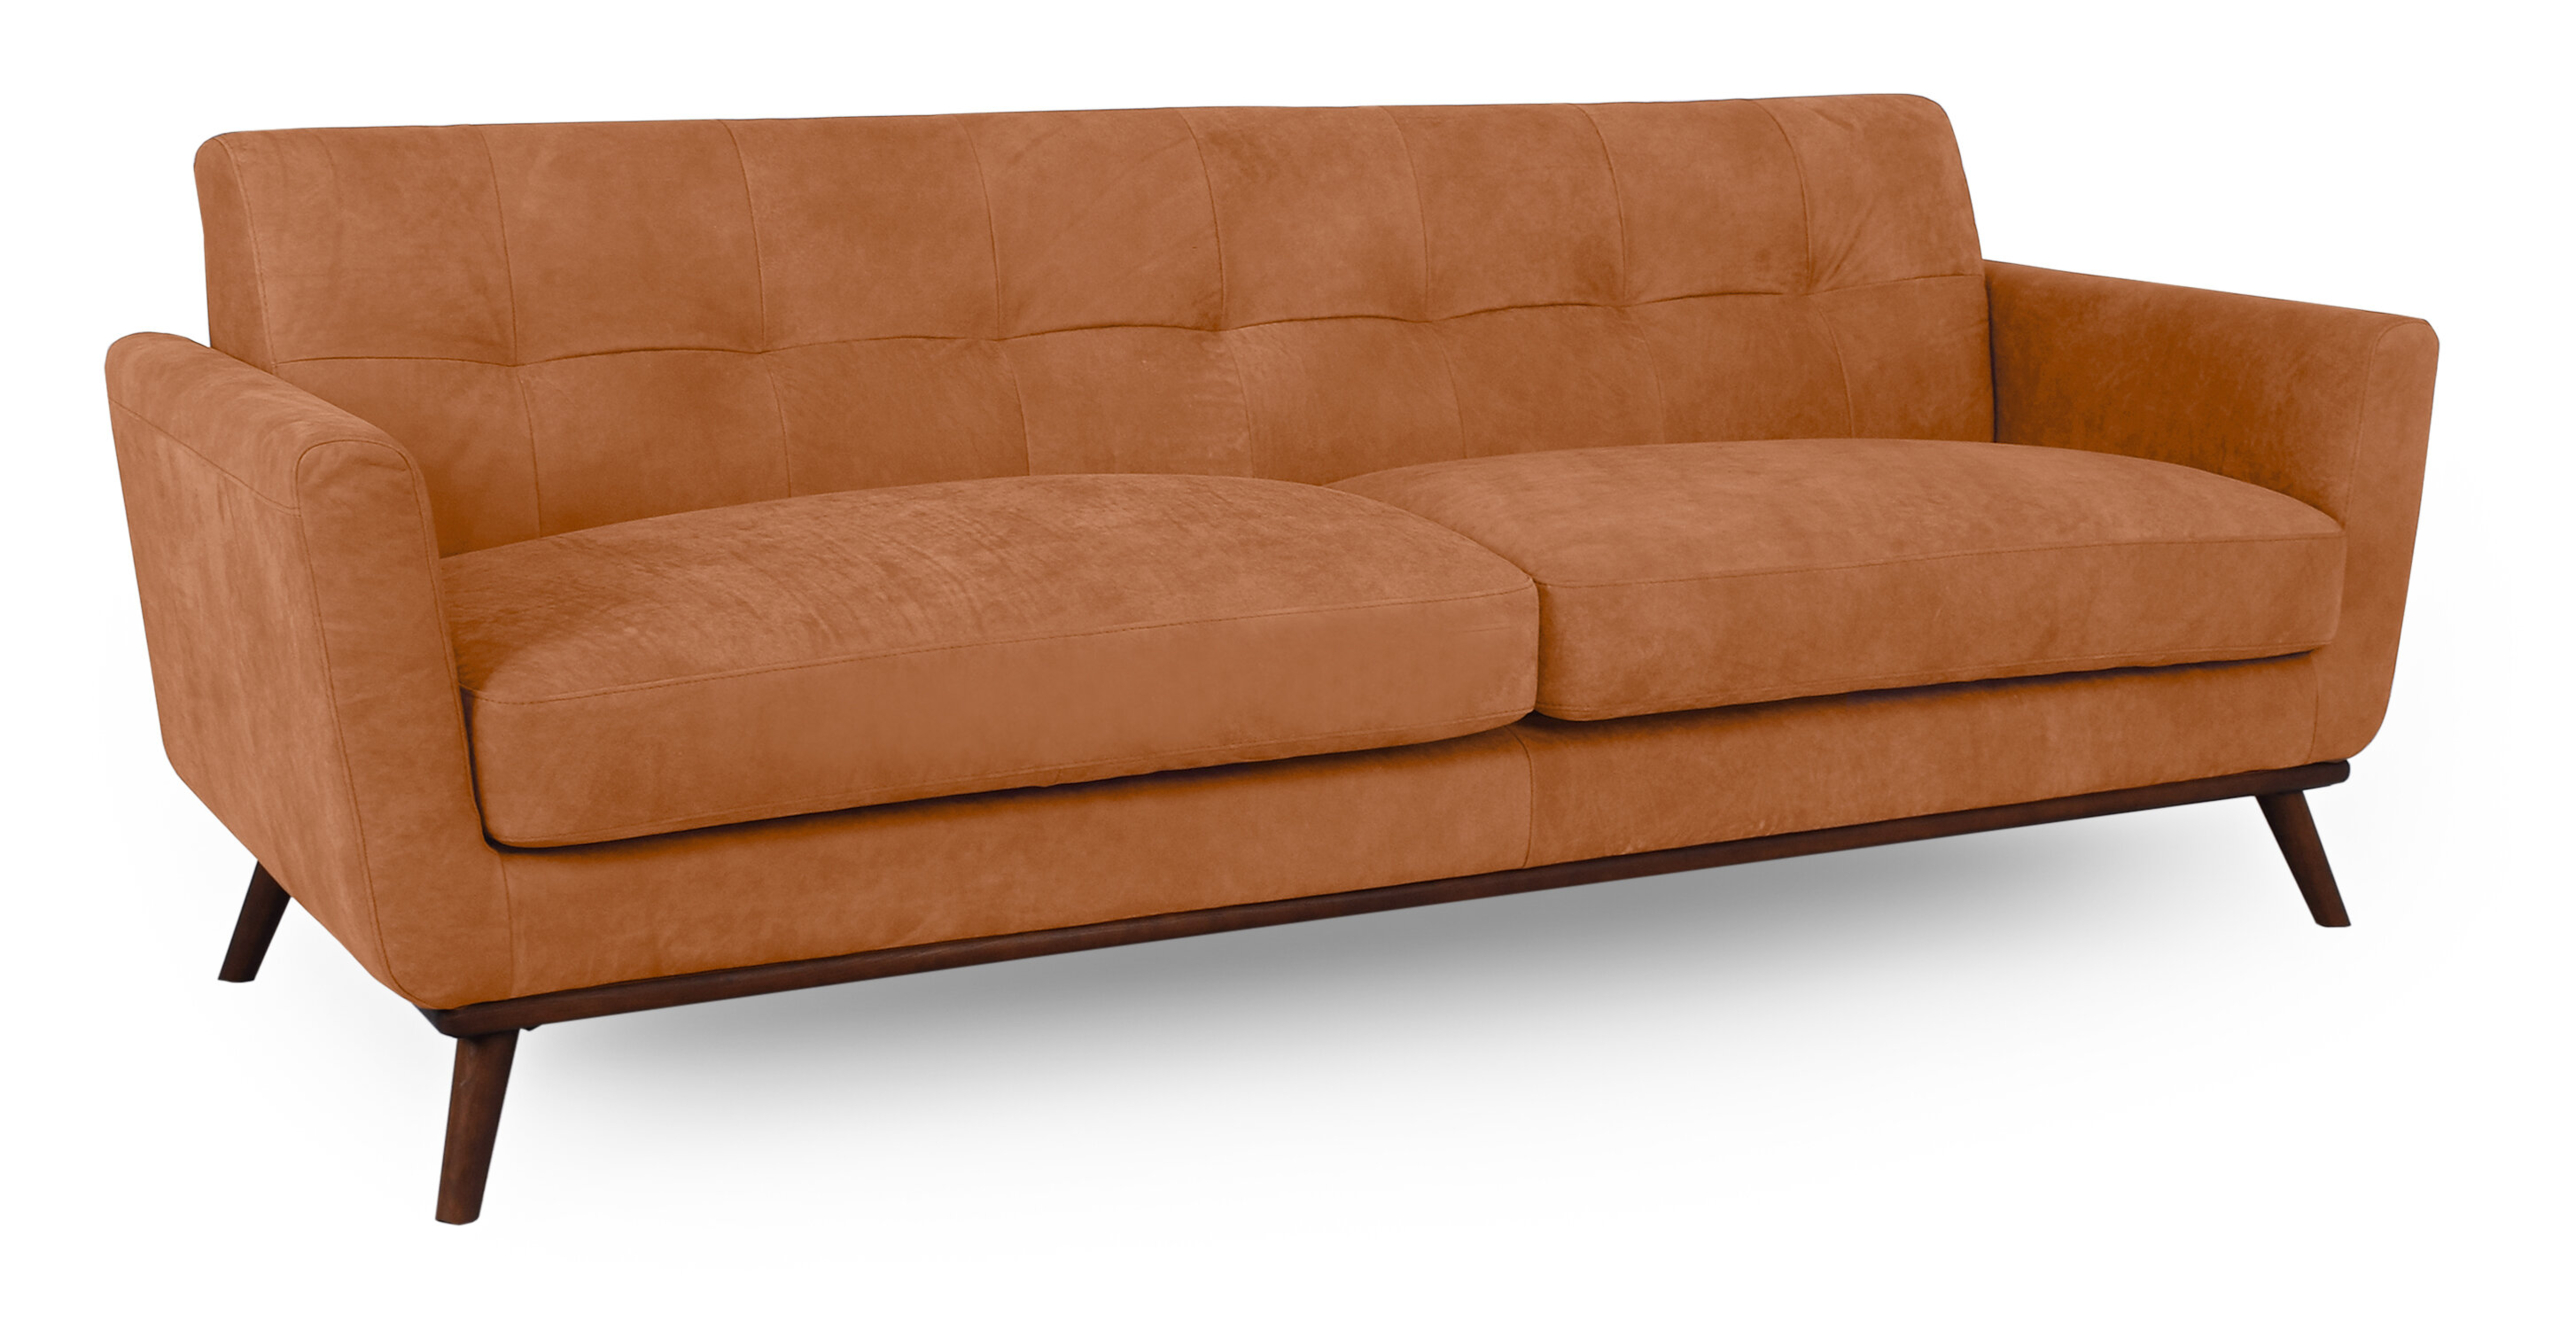 mid century tufted leather sofa review